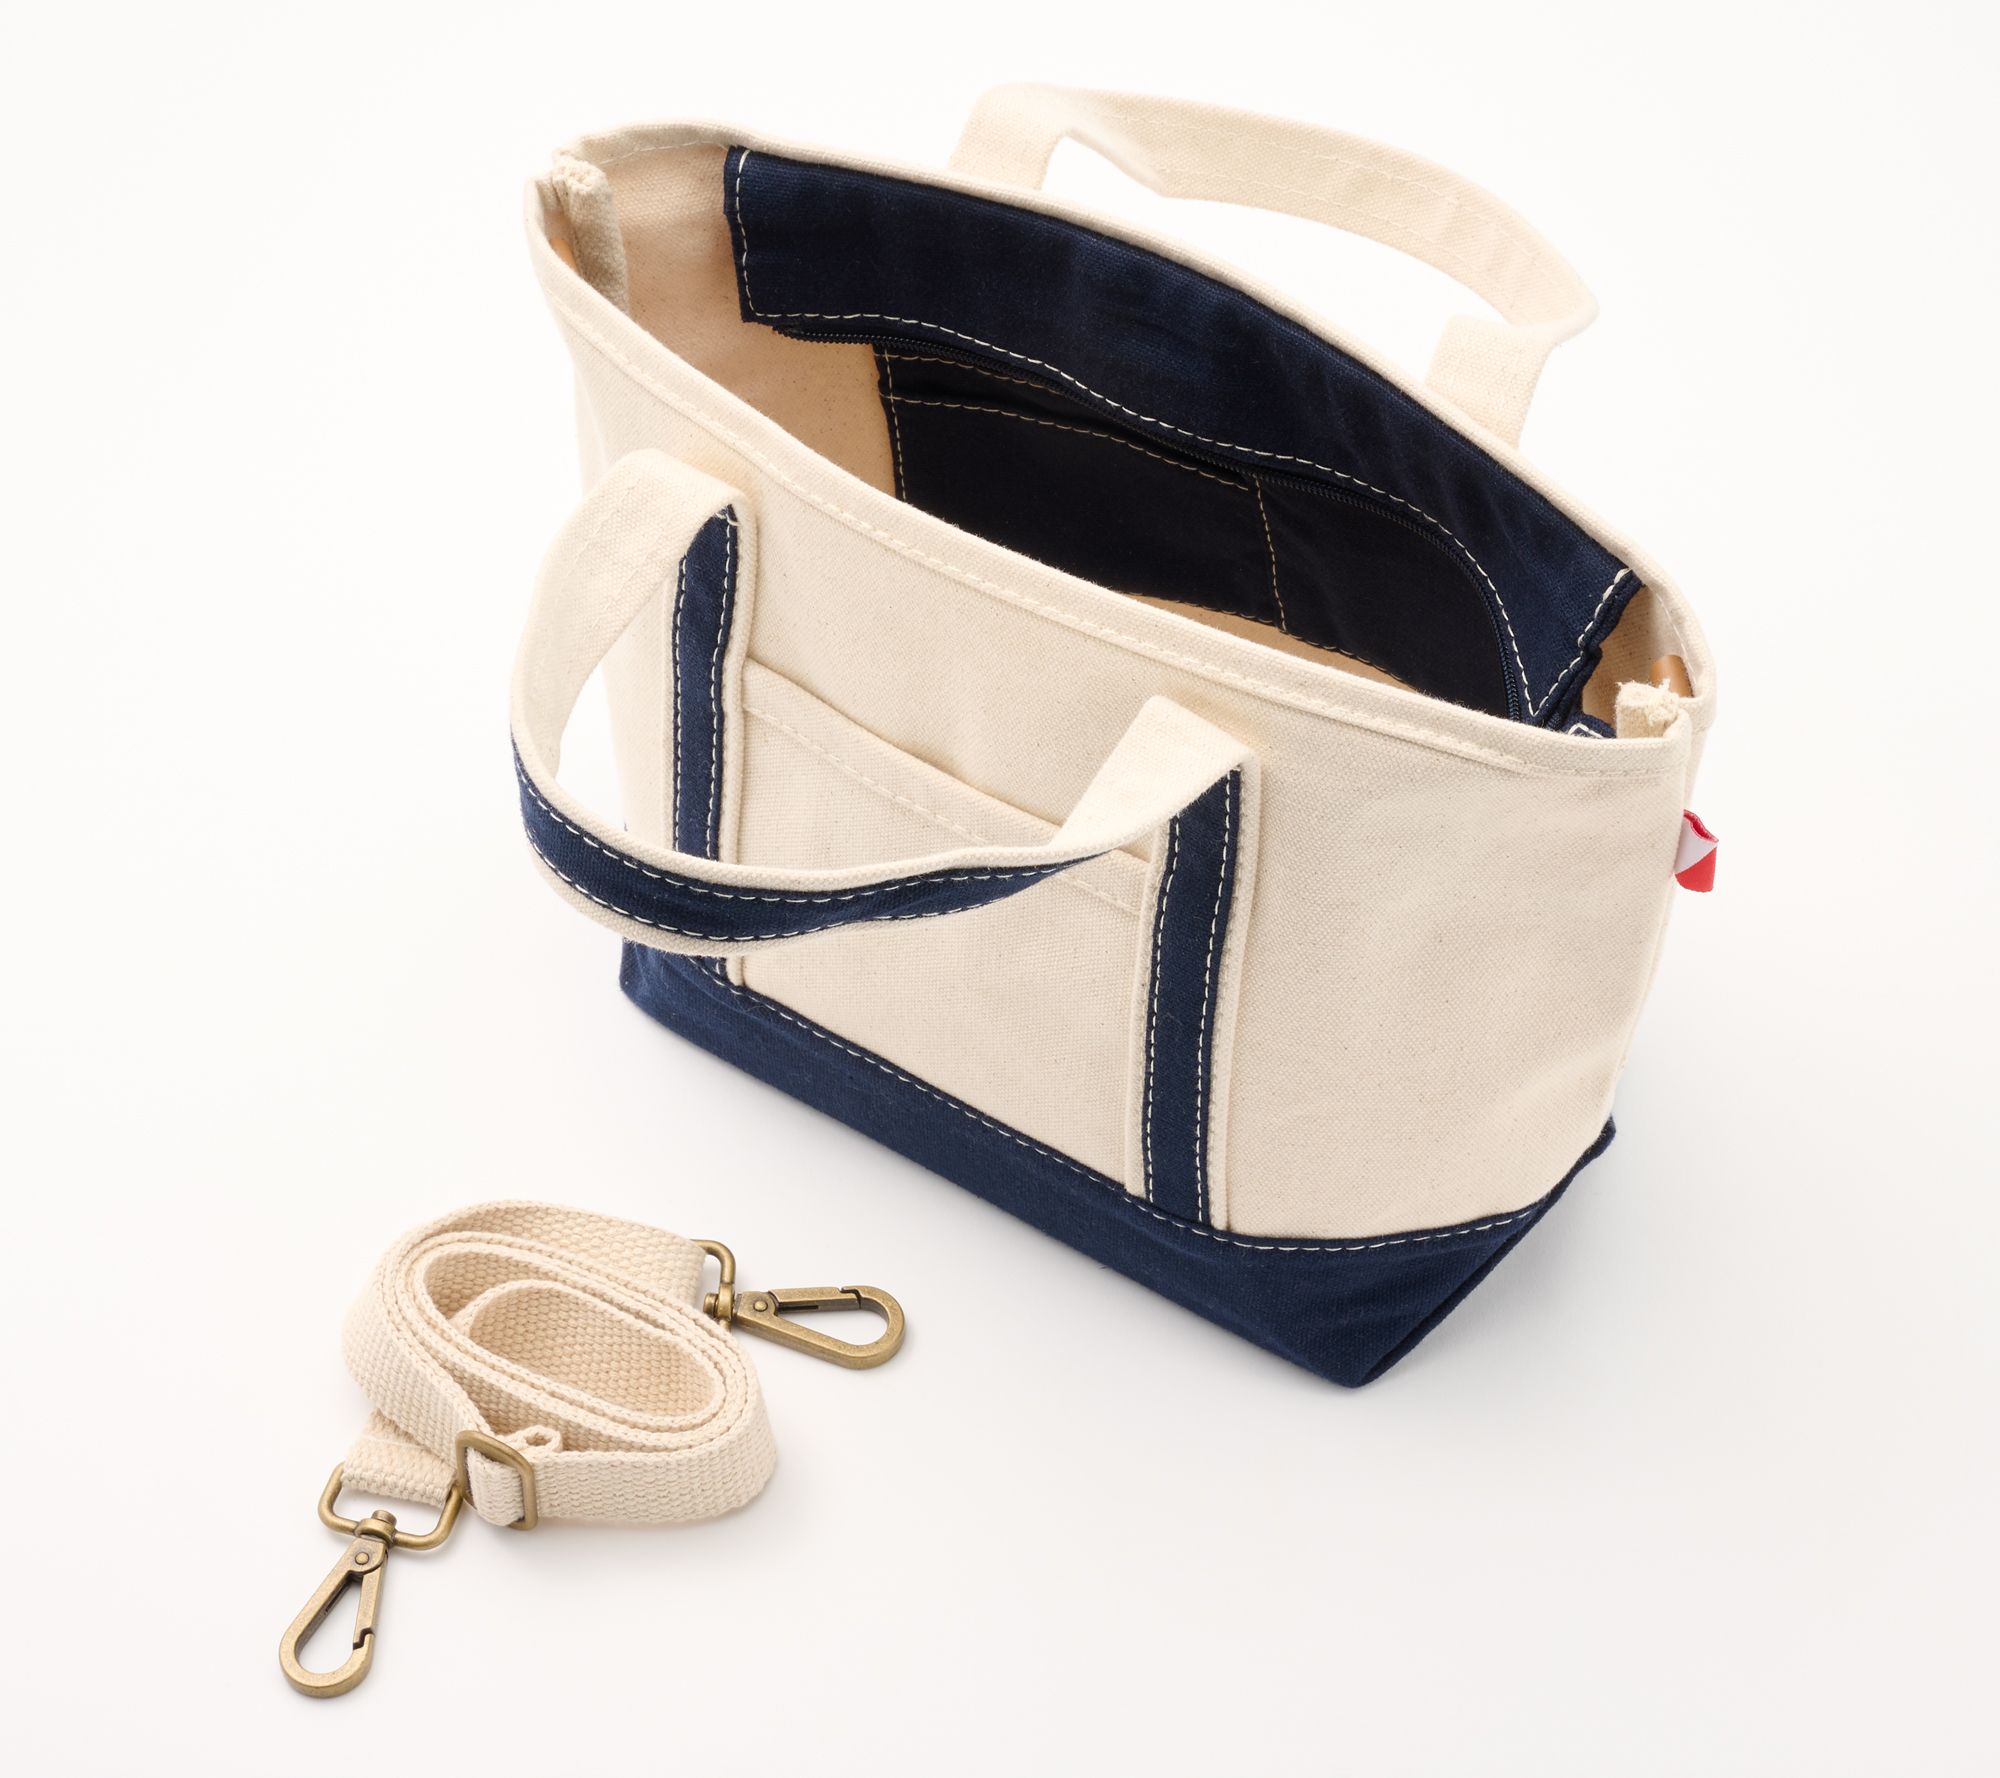 ShoreBags Large Canvas Boat Tote ,Navy